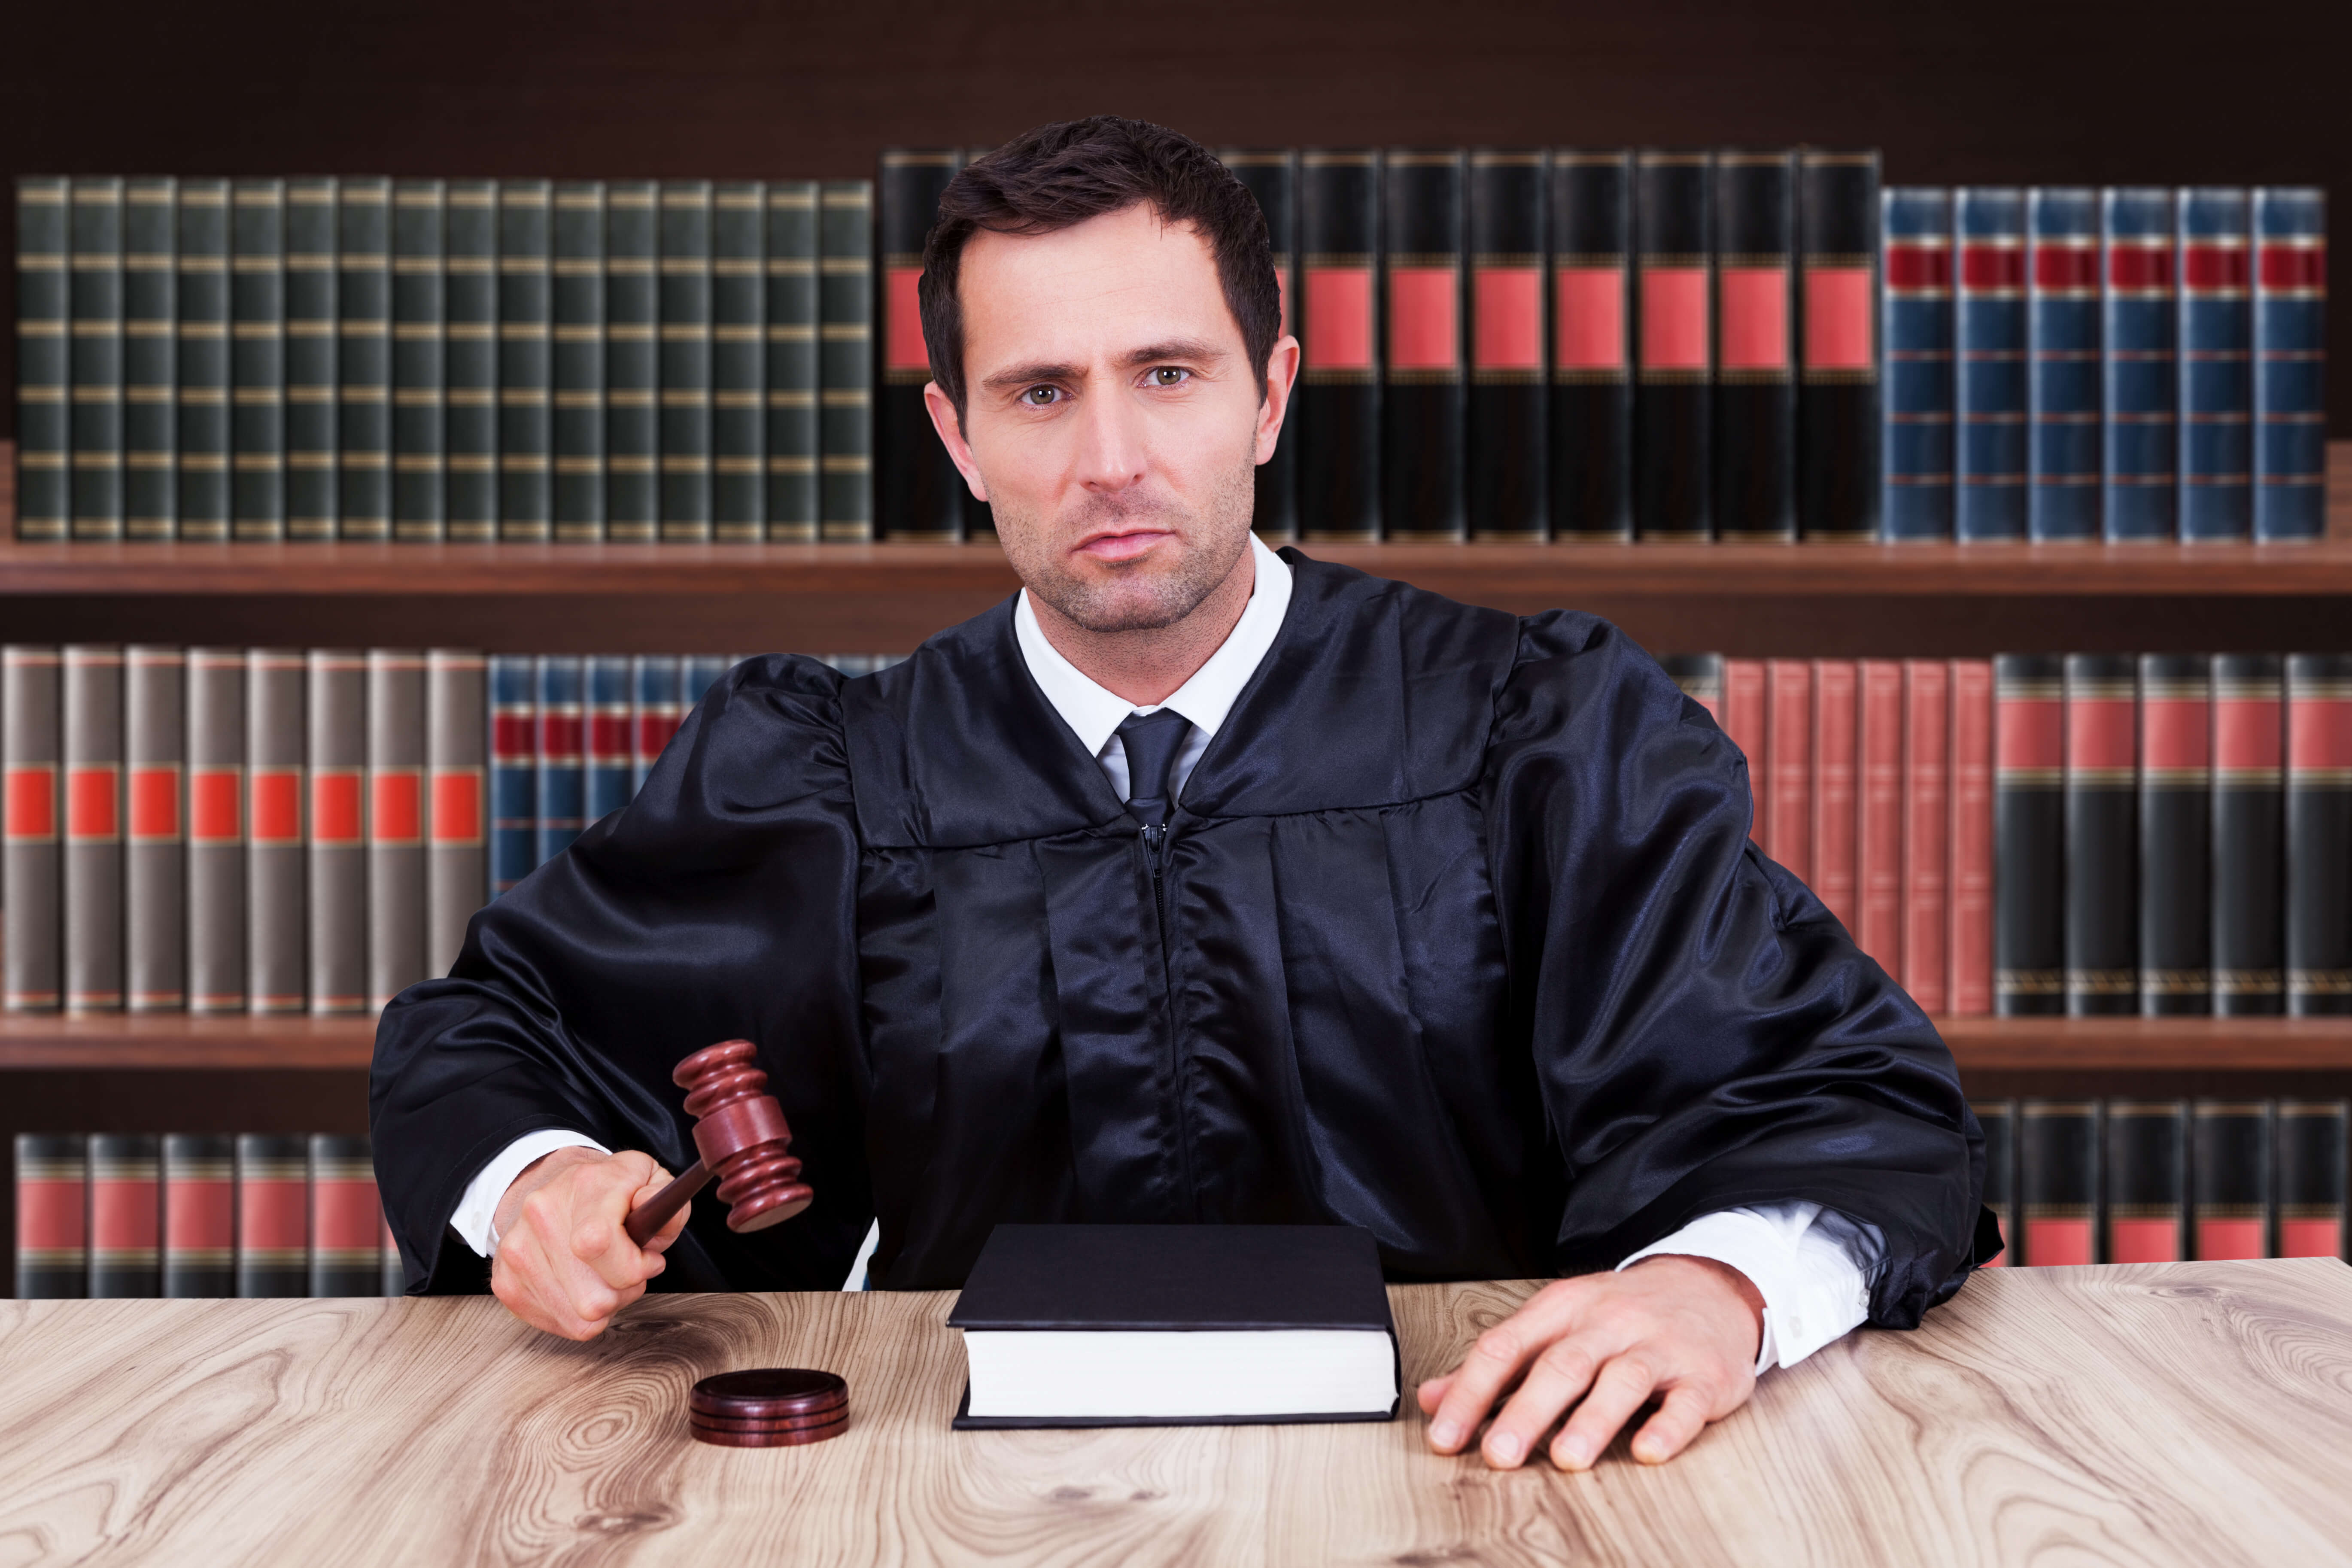 Hire A University Robbery Attorney